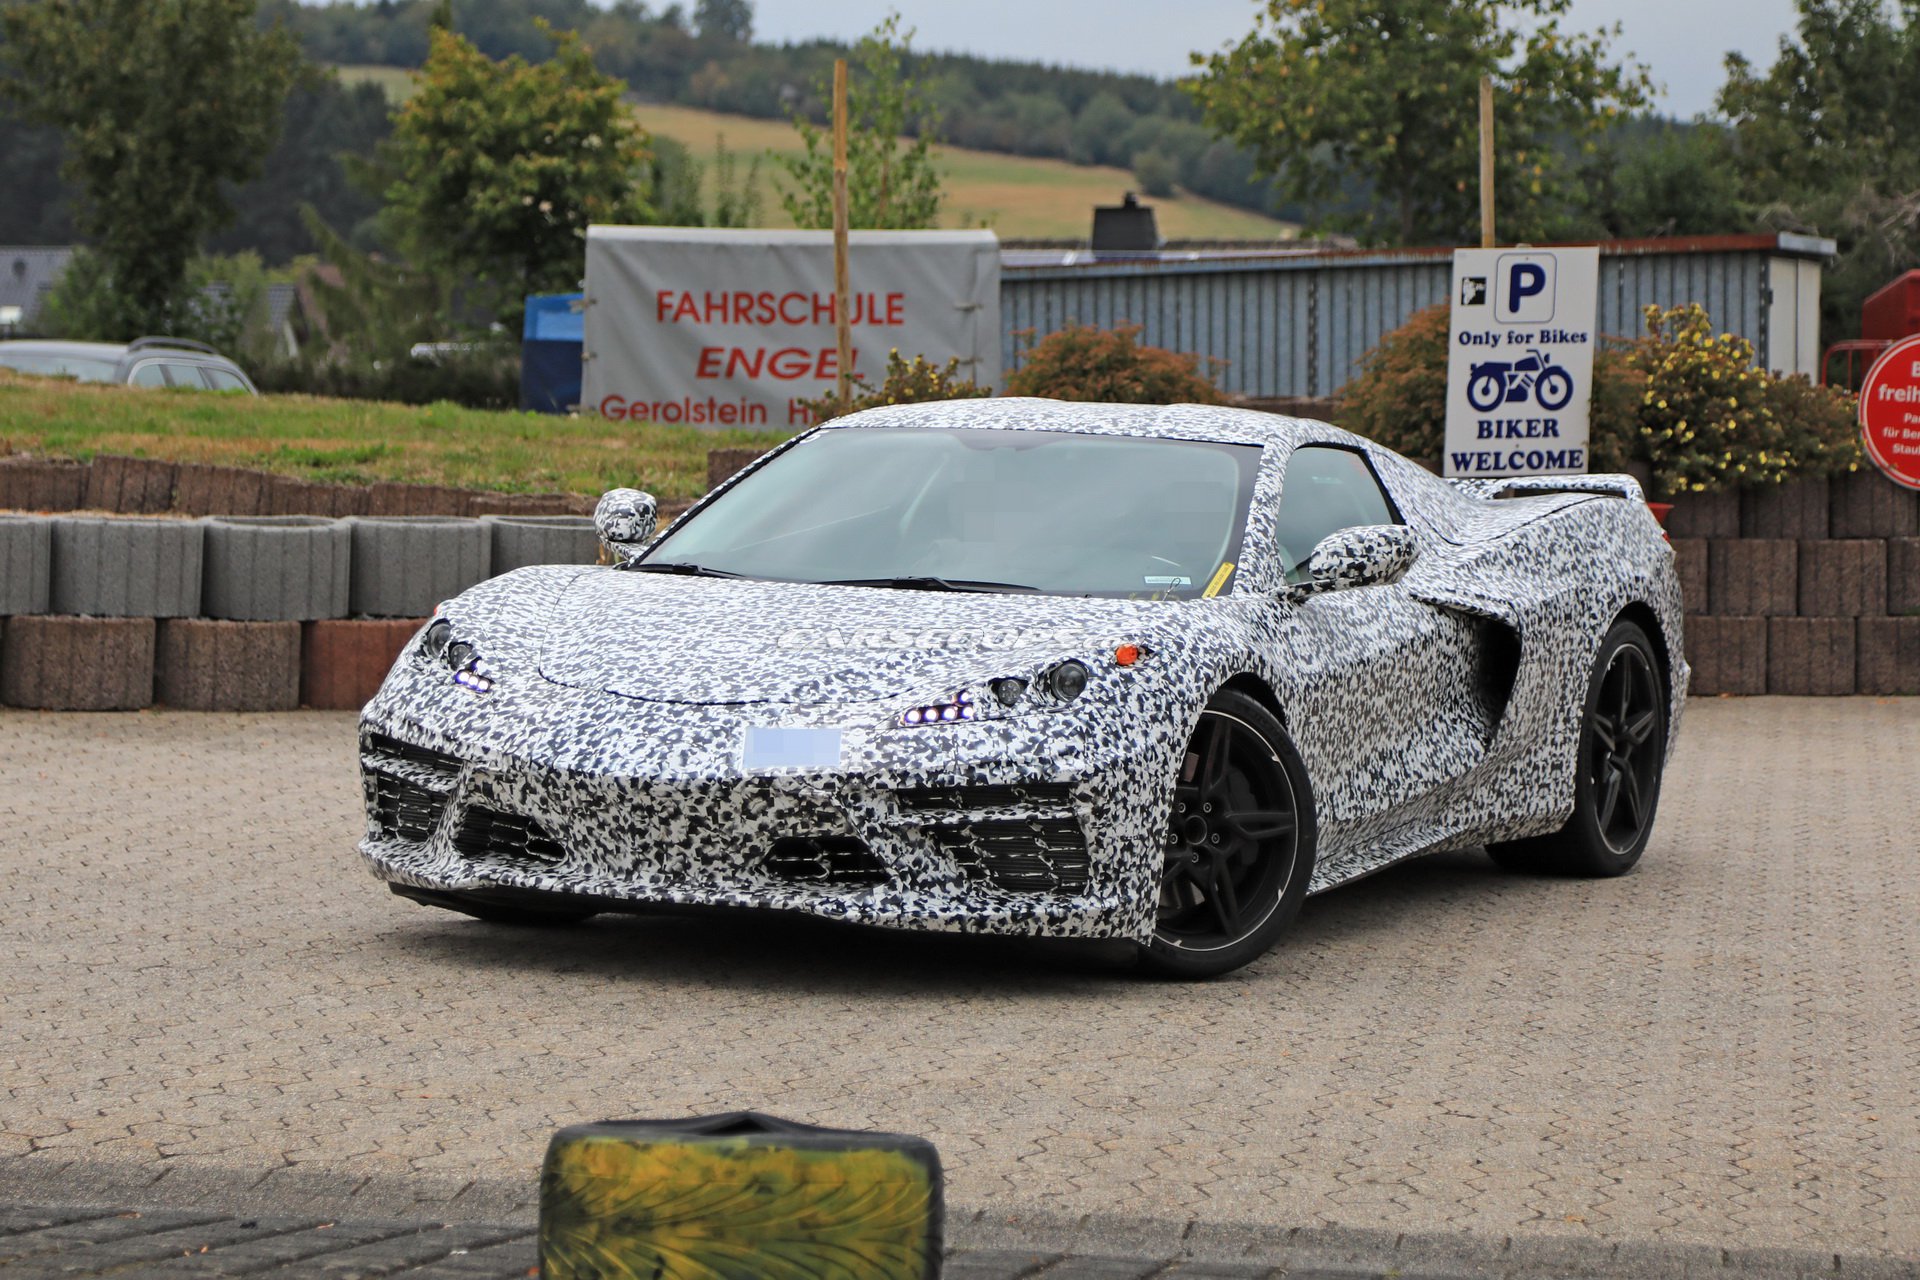 The 2020 Mid-Engine Corvette photographed near the Nurburgring on September 3, 2018.